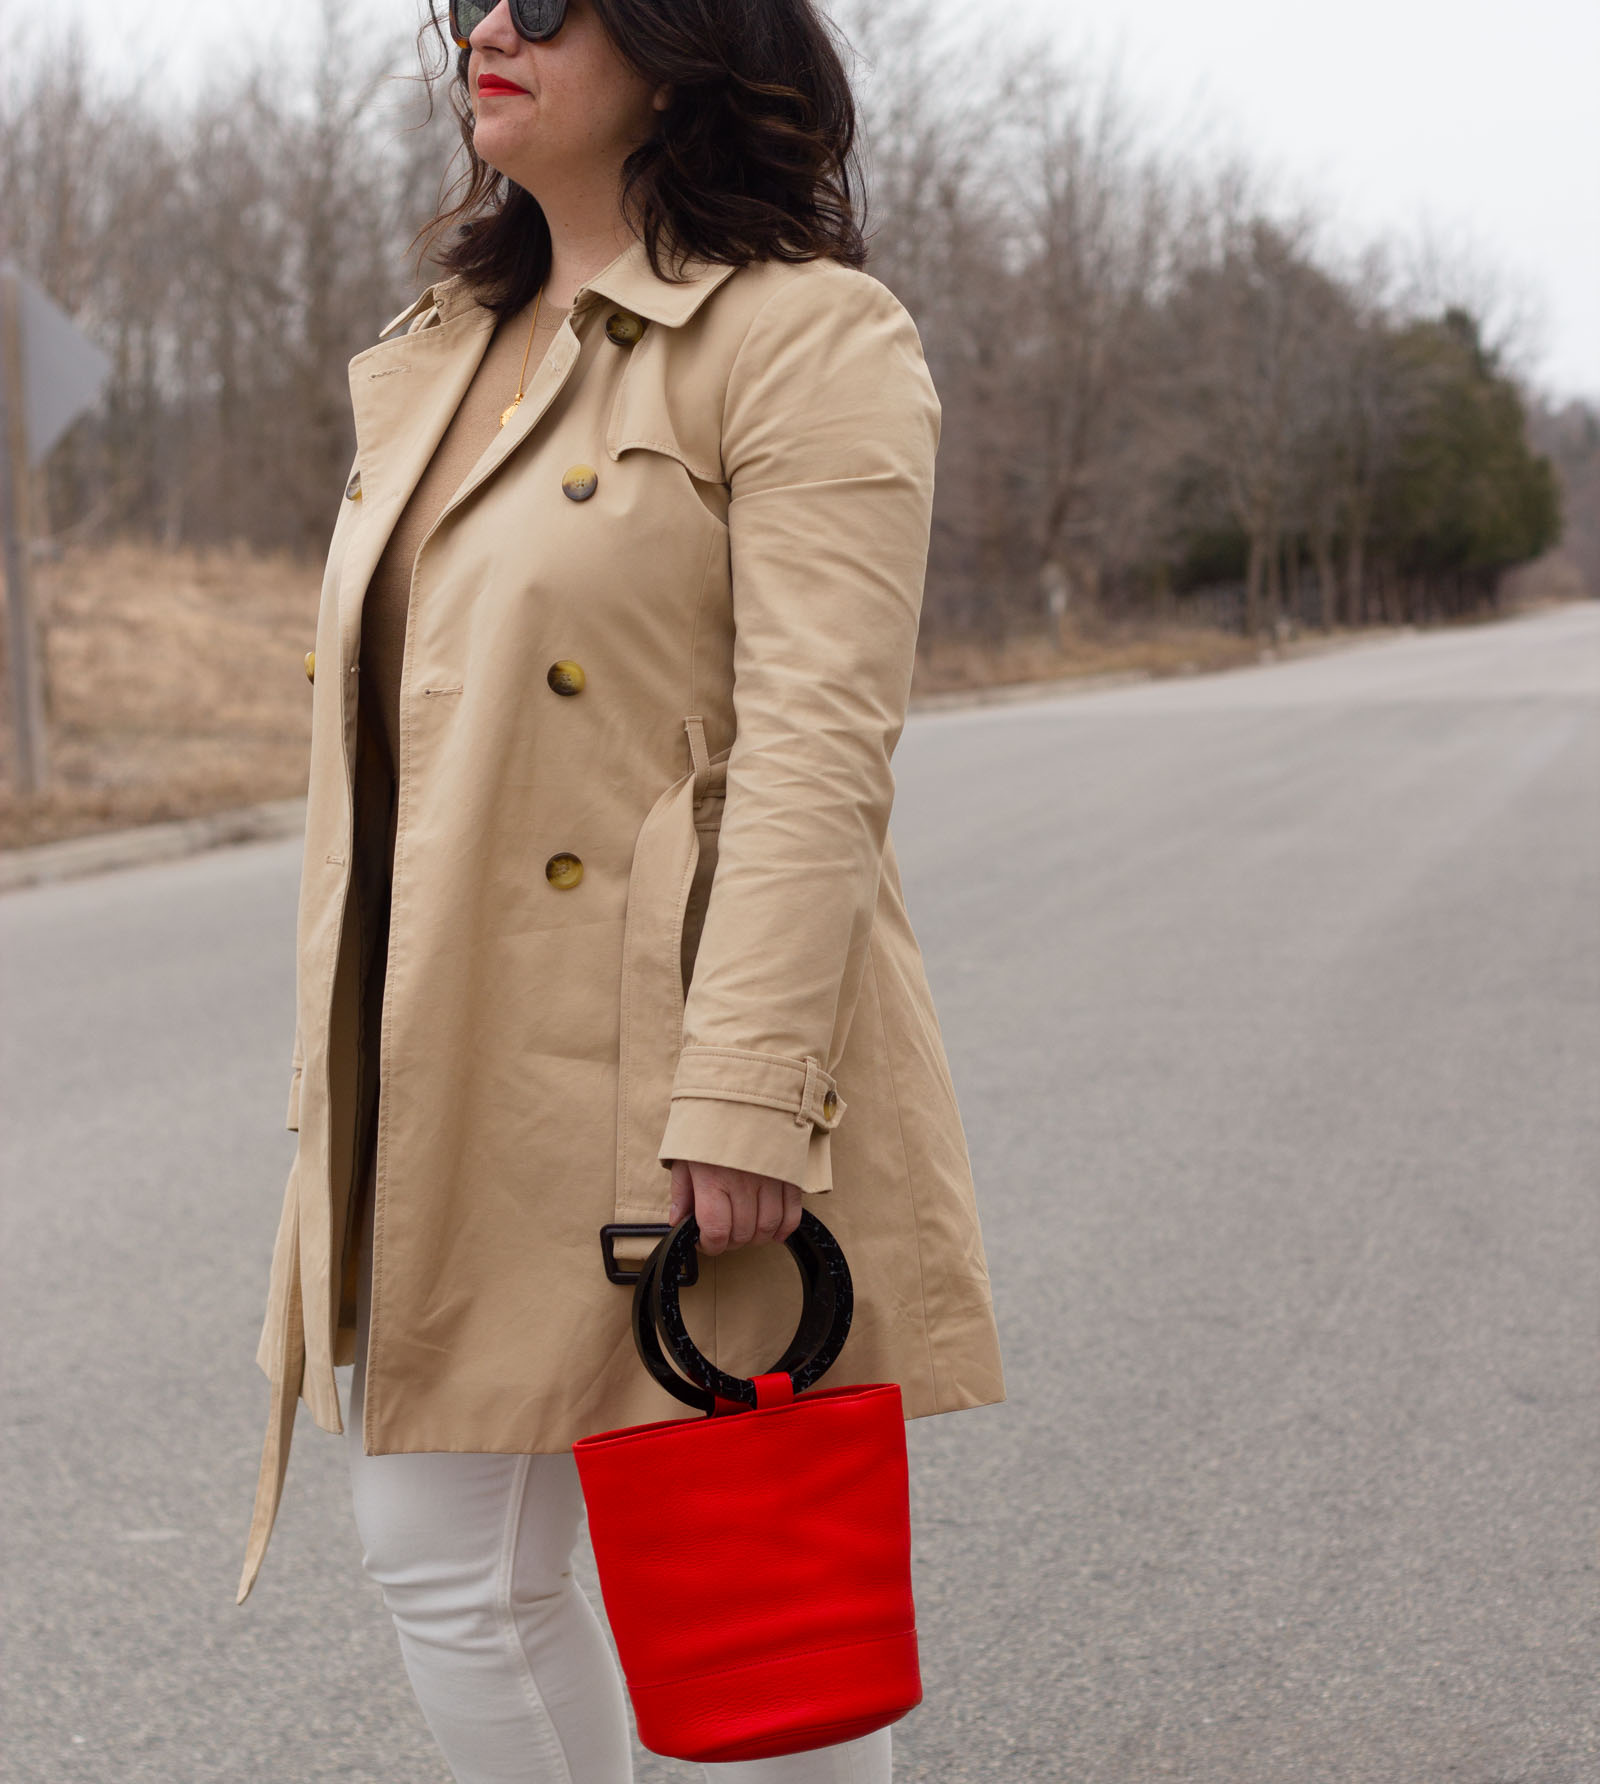 spring trench coat outfit